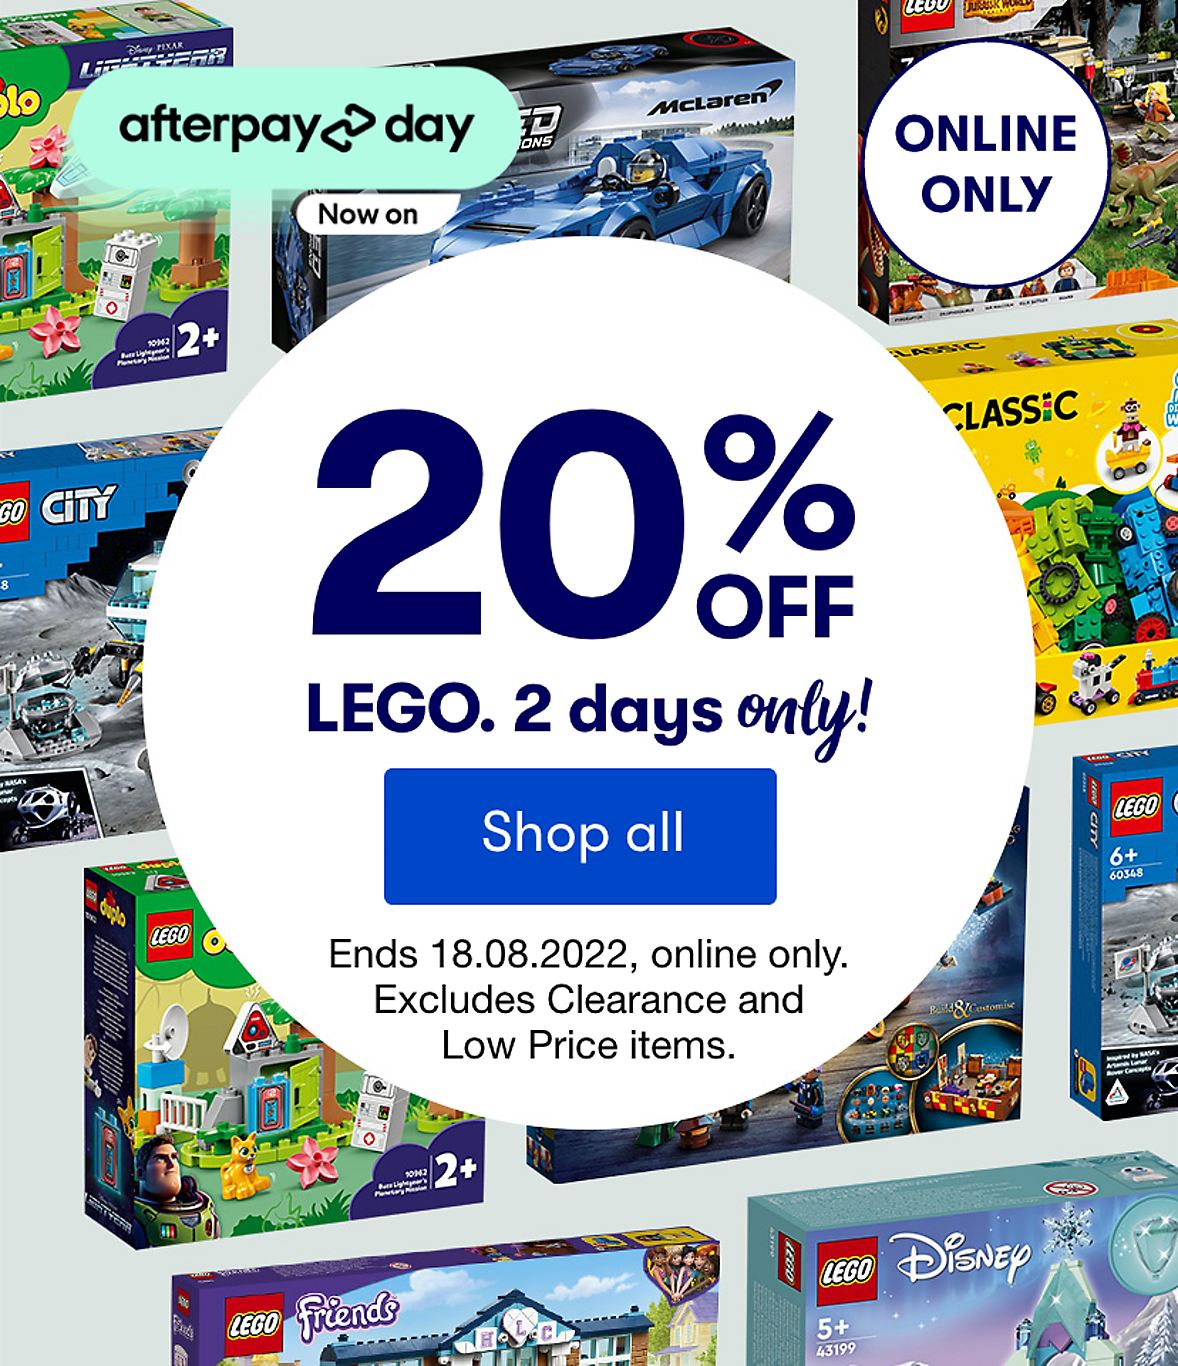 2 Days only! 20% off LEGO, online only. Hurry ends 18.08.2022